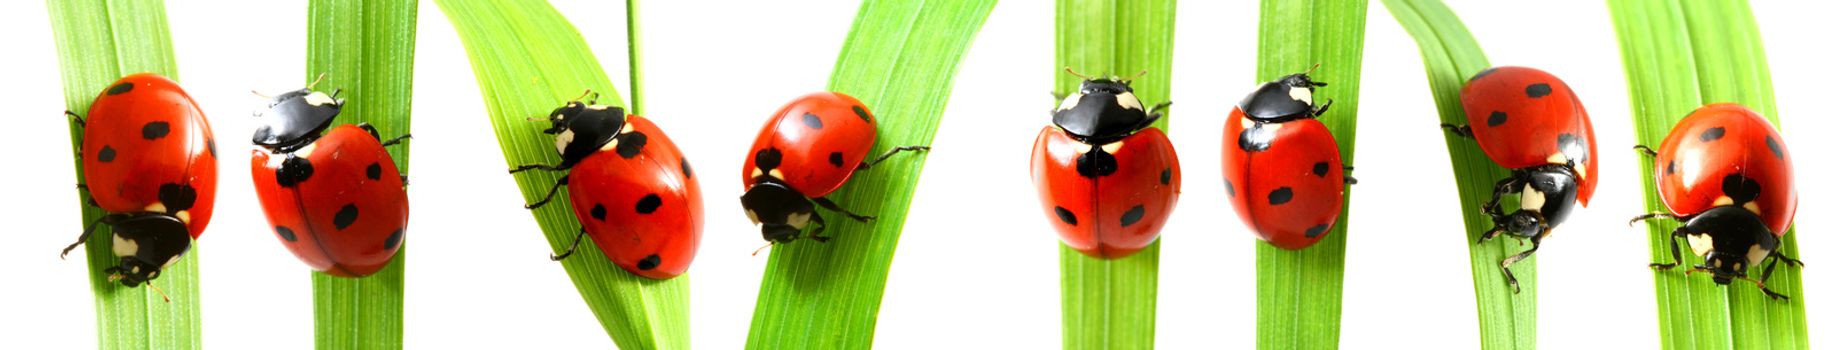 red ladybug on green grass isolated on white background set of pictures